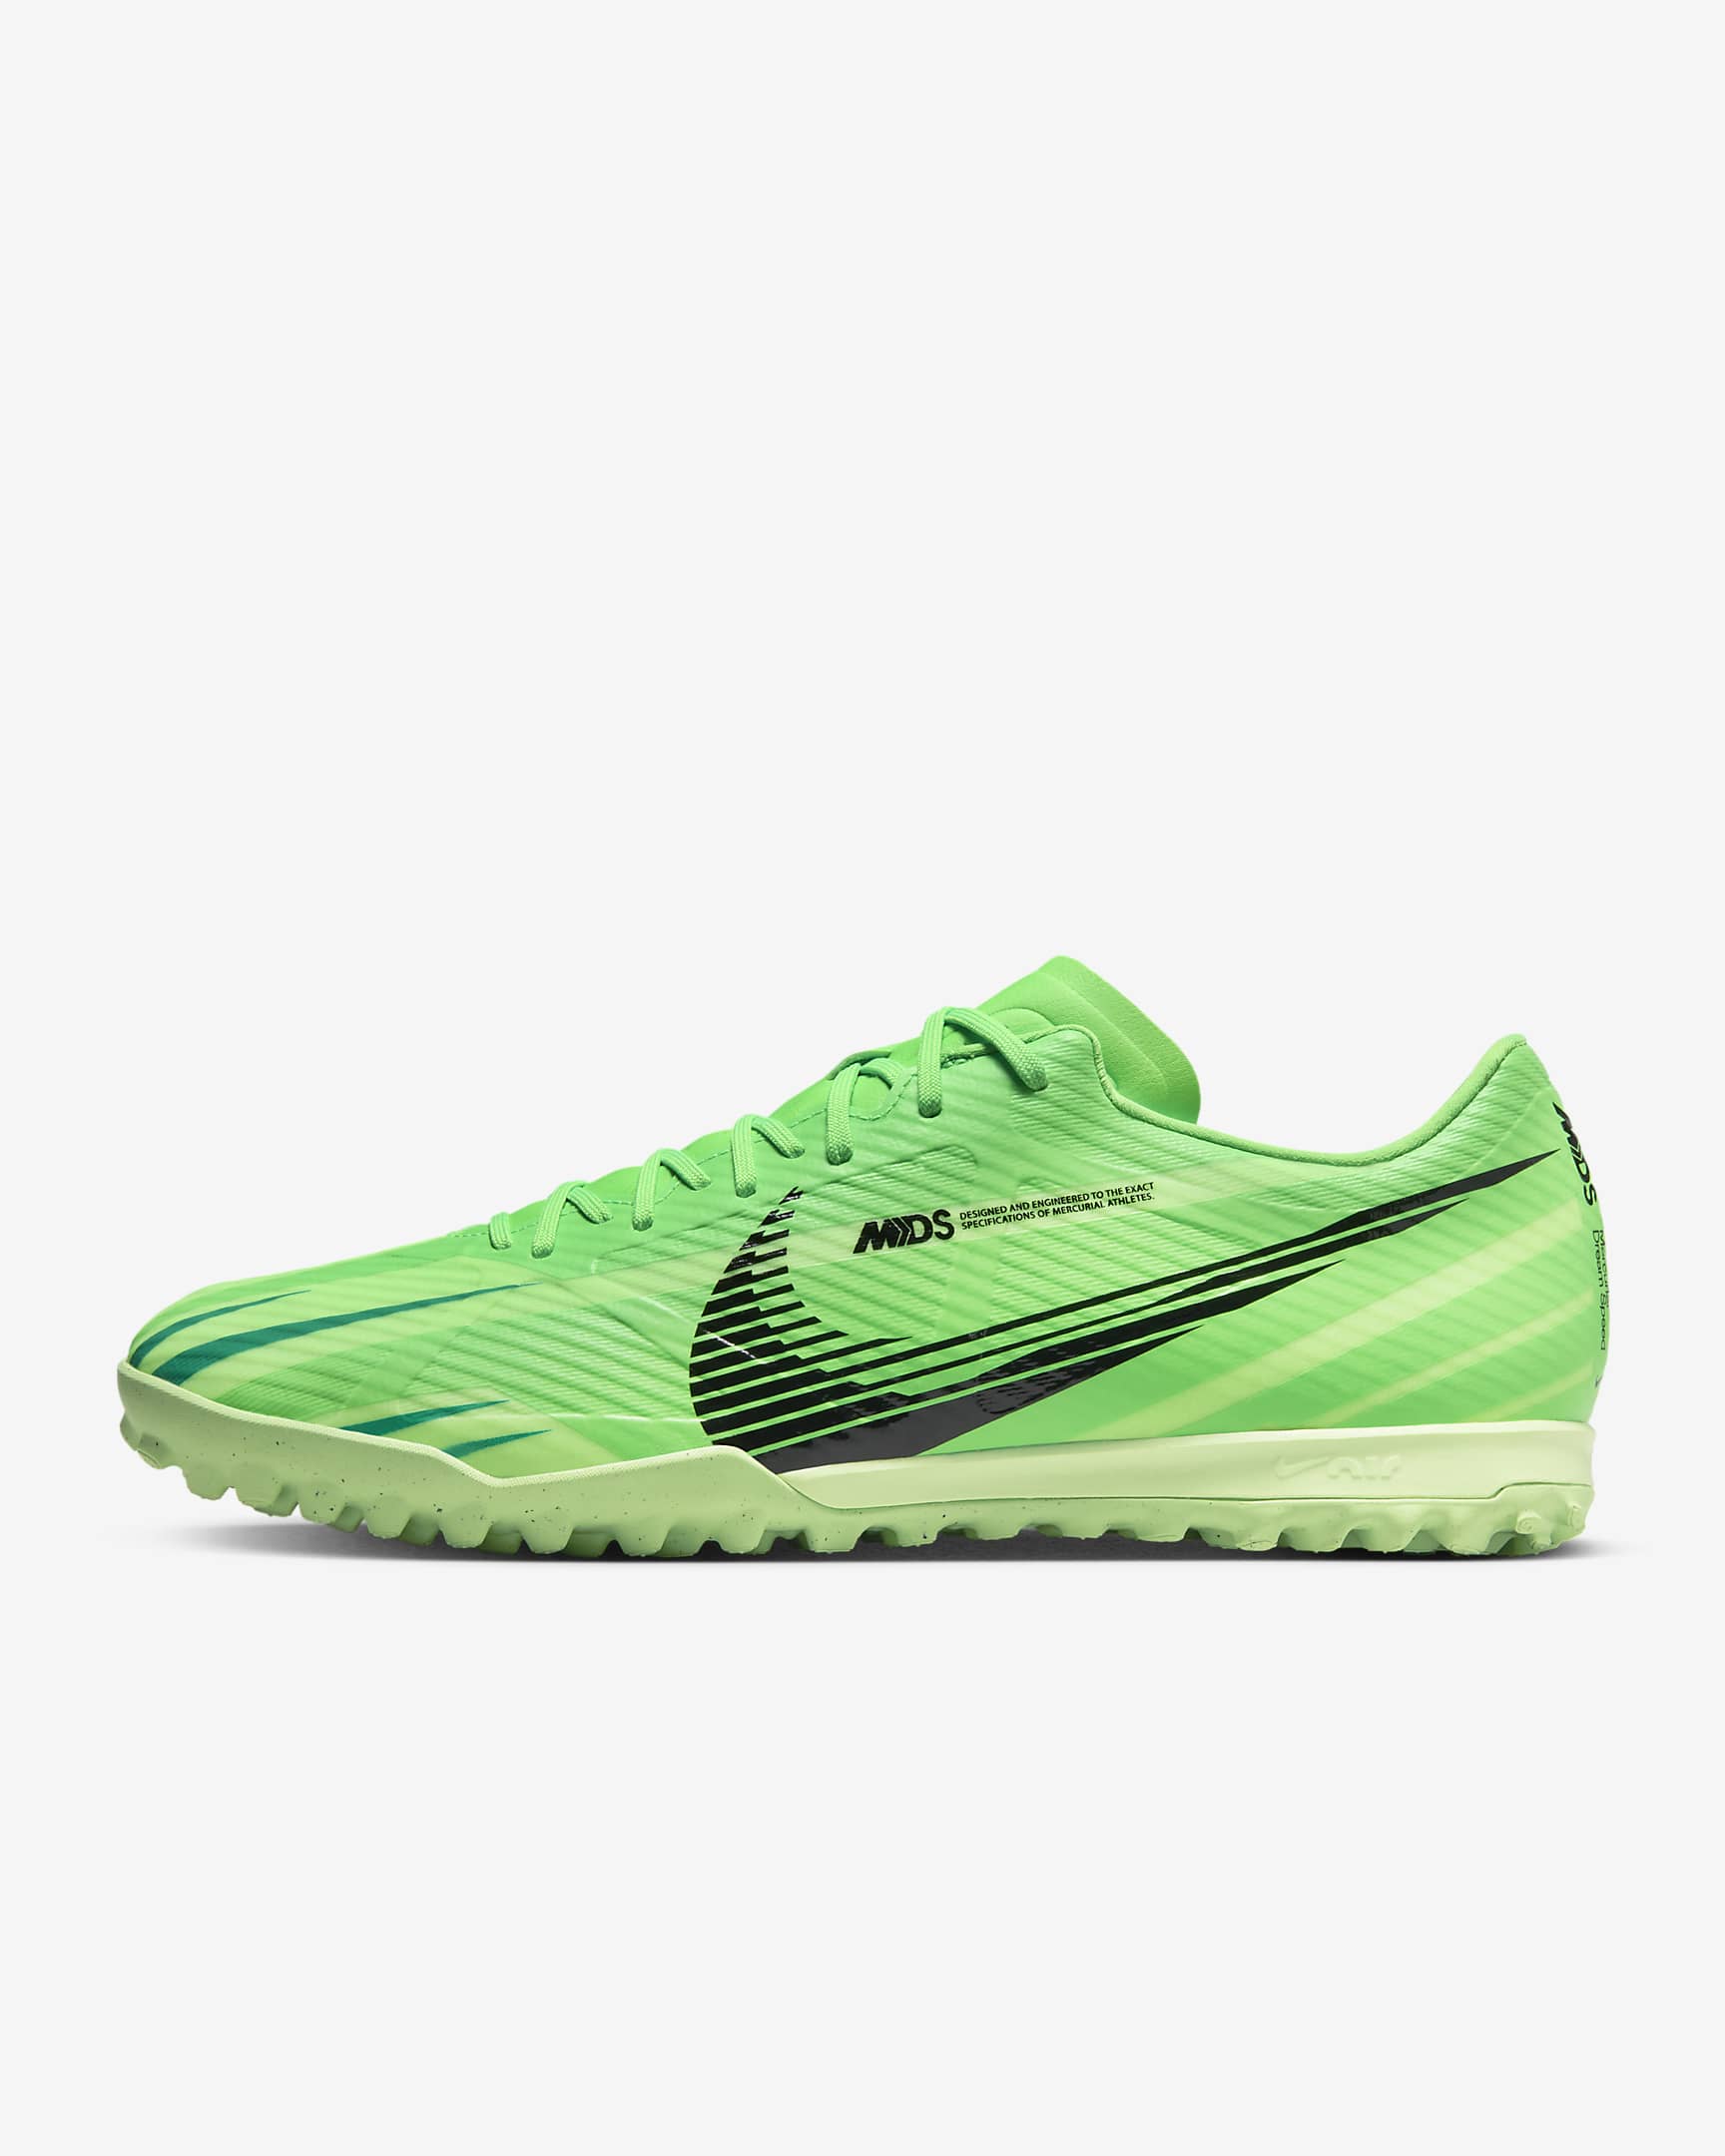 Nike Vapor 15 Academy Mercurial Dream Speed TF Low-Top Football Shoes ...